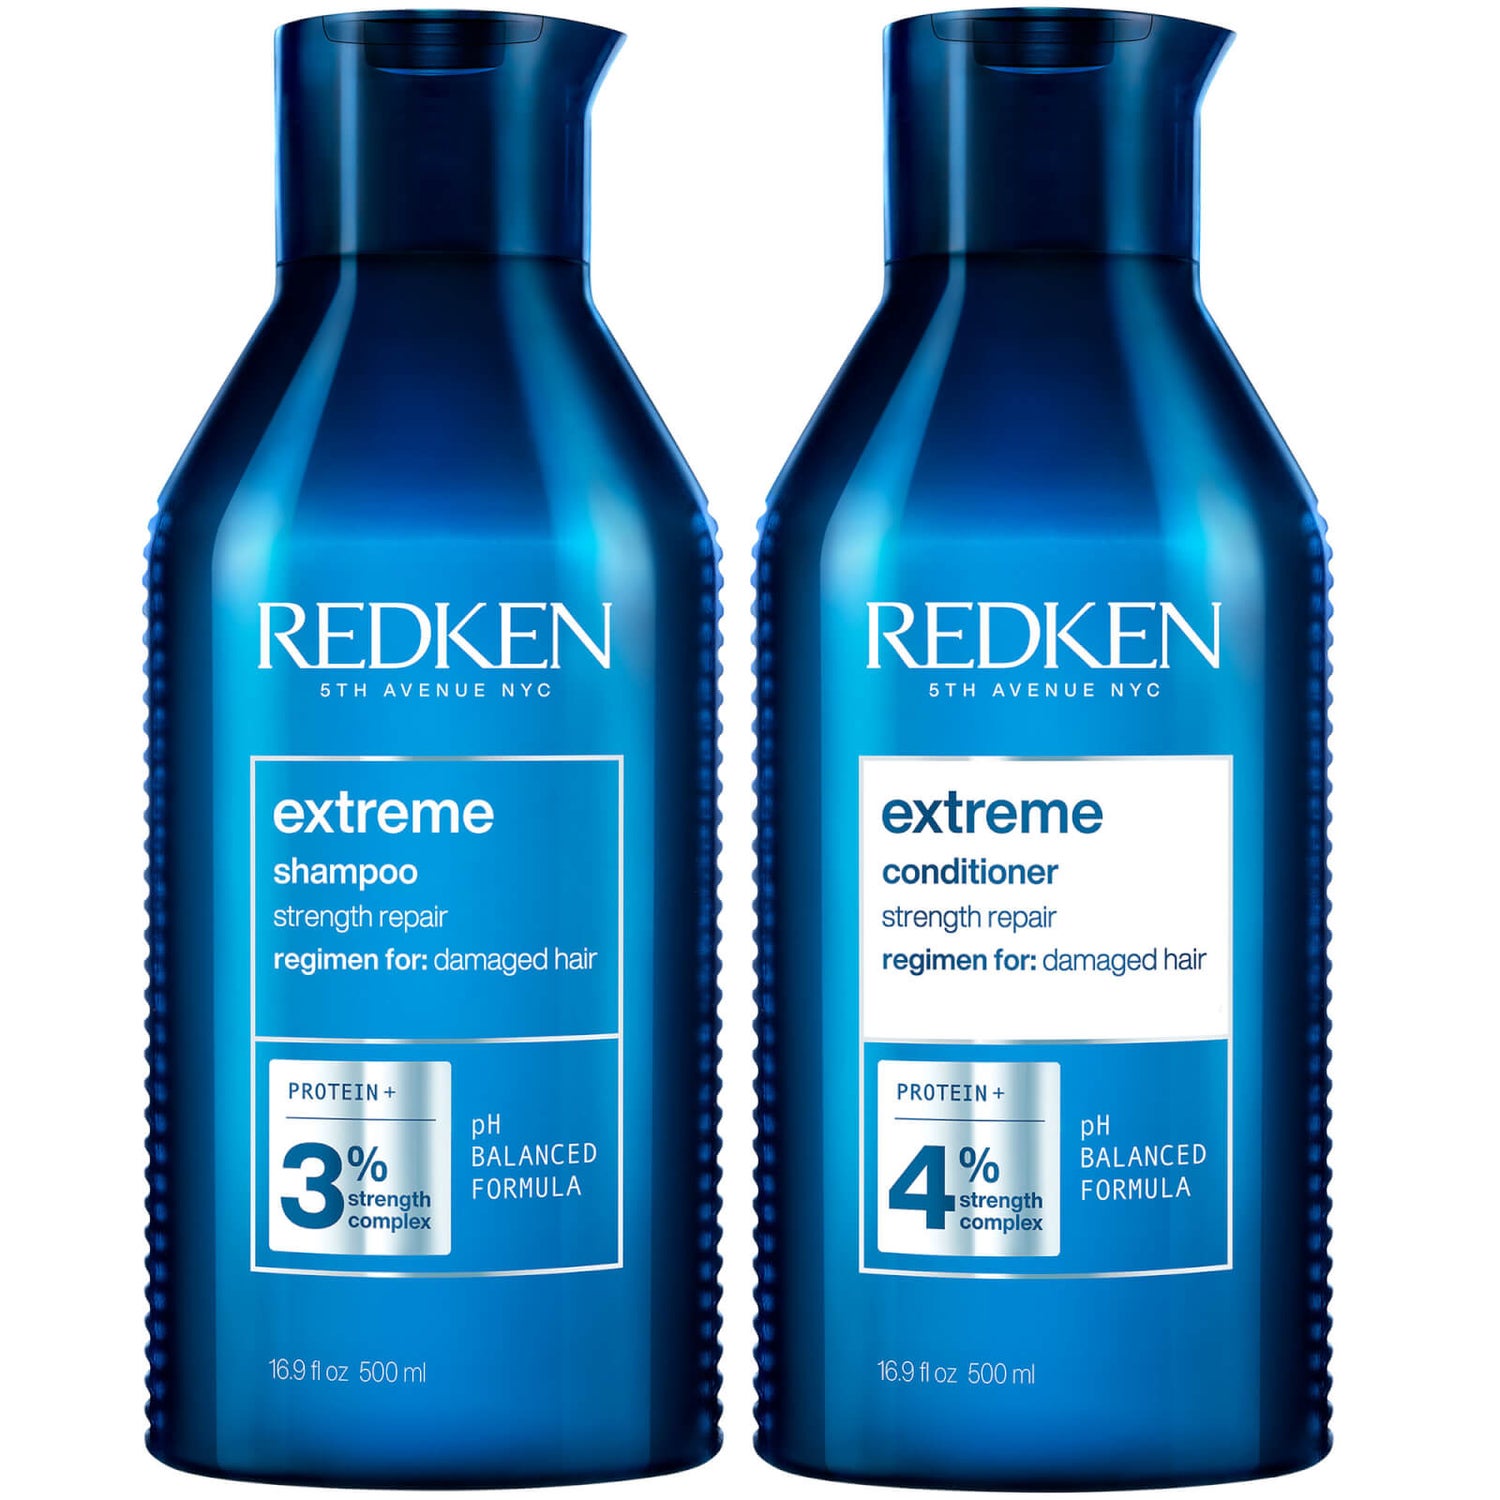 Redken Extreme Shampoo and Conditioner Routine For Damaged Hair 500ml